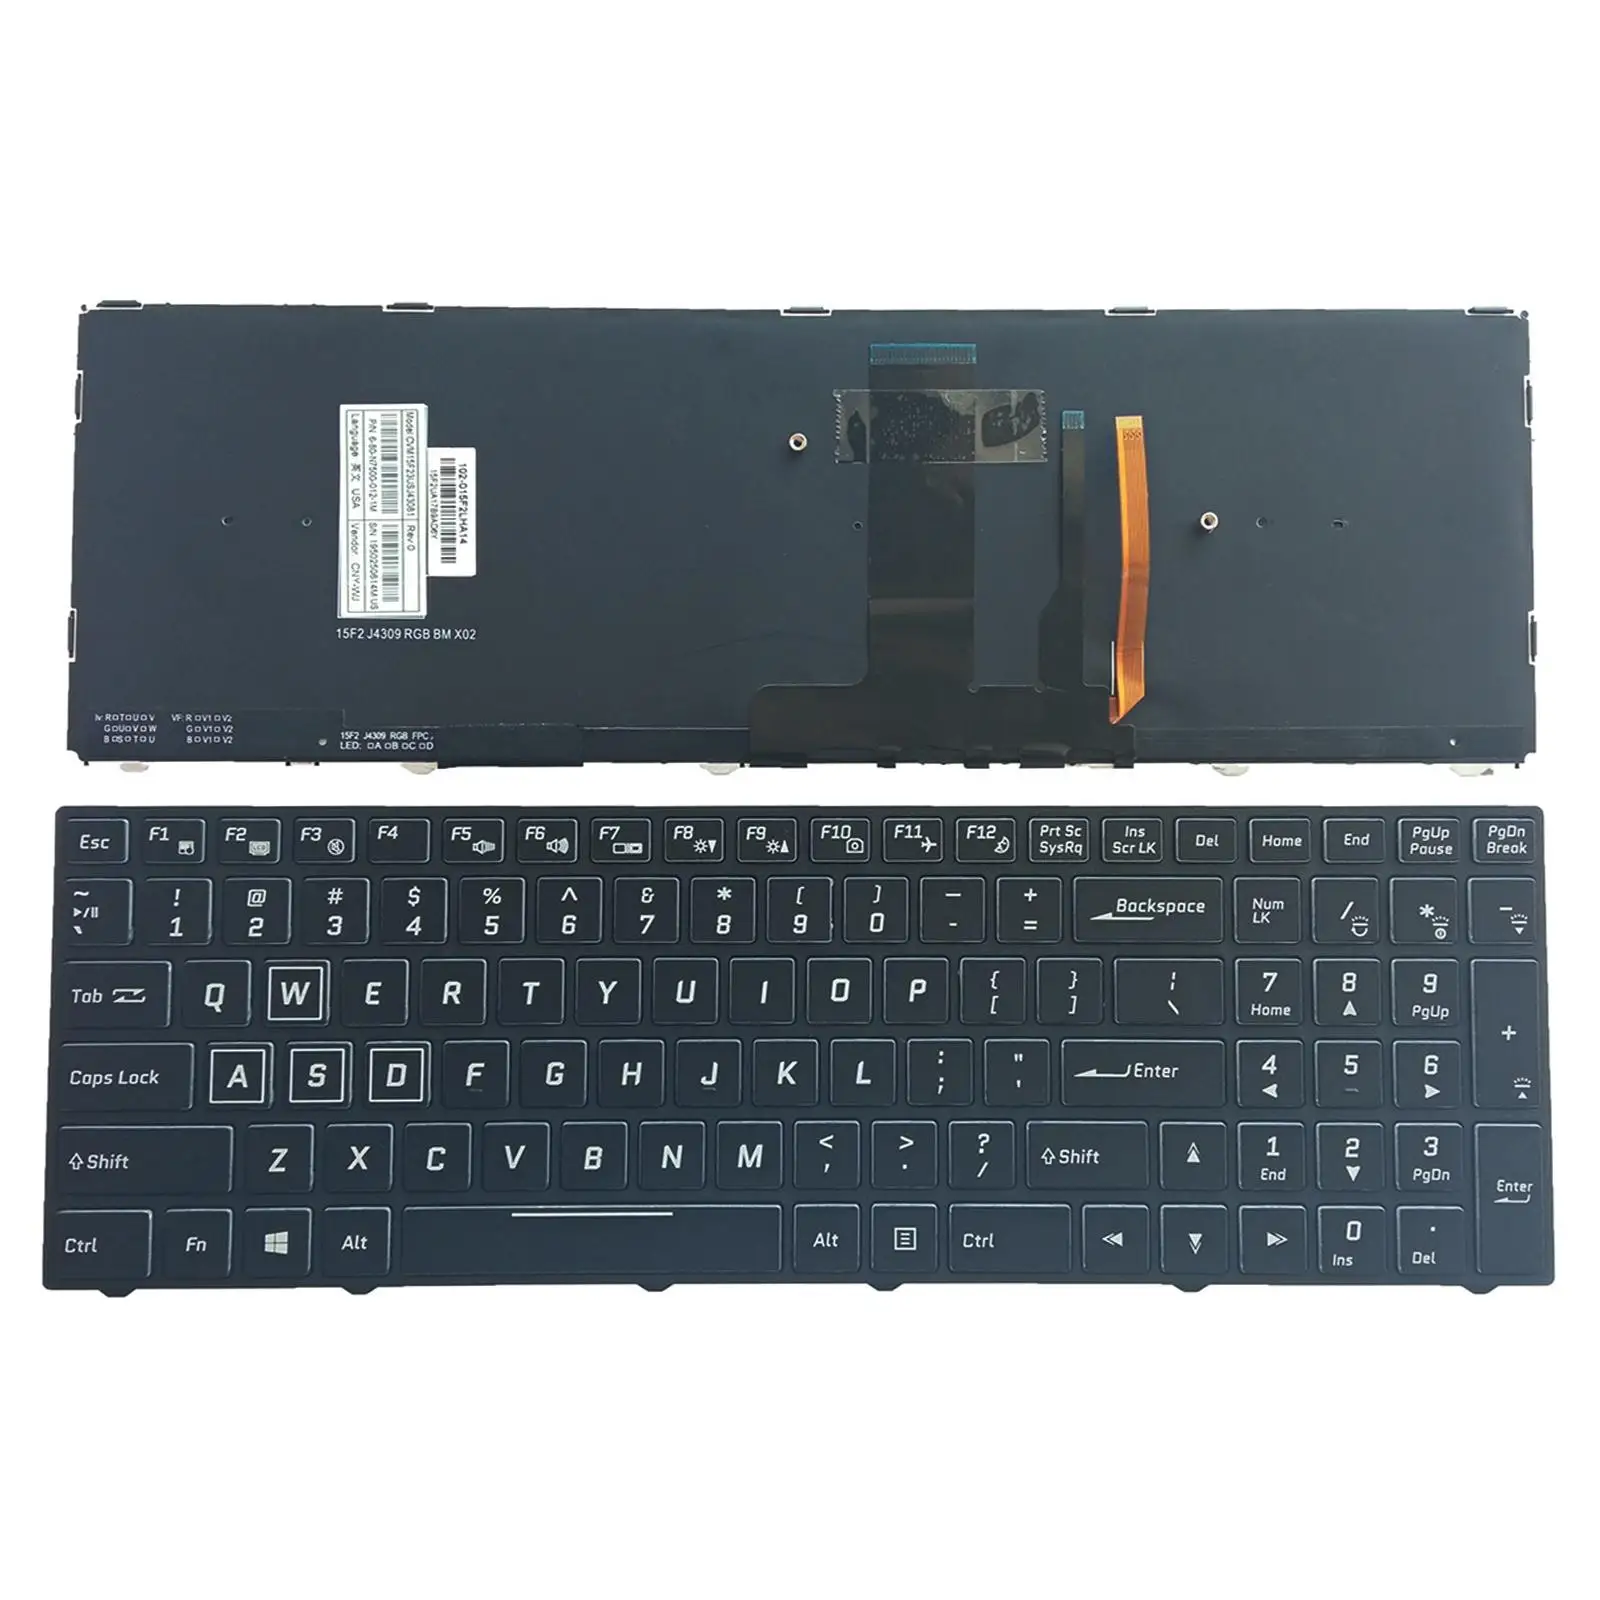 Laptop Keyboard Replacement, US Colorful Backlight English for Clevo N850 N857HK N950 Cvm15F23Usj430D 6-80-N85H3-191-1